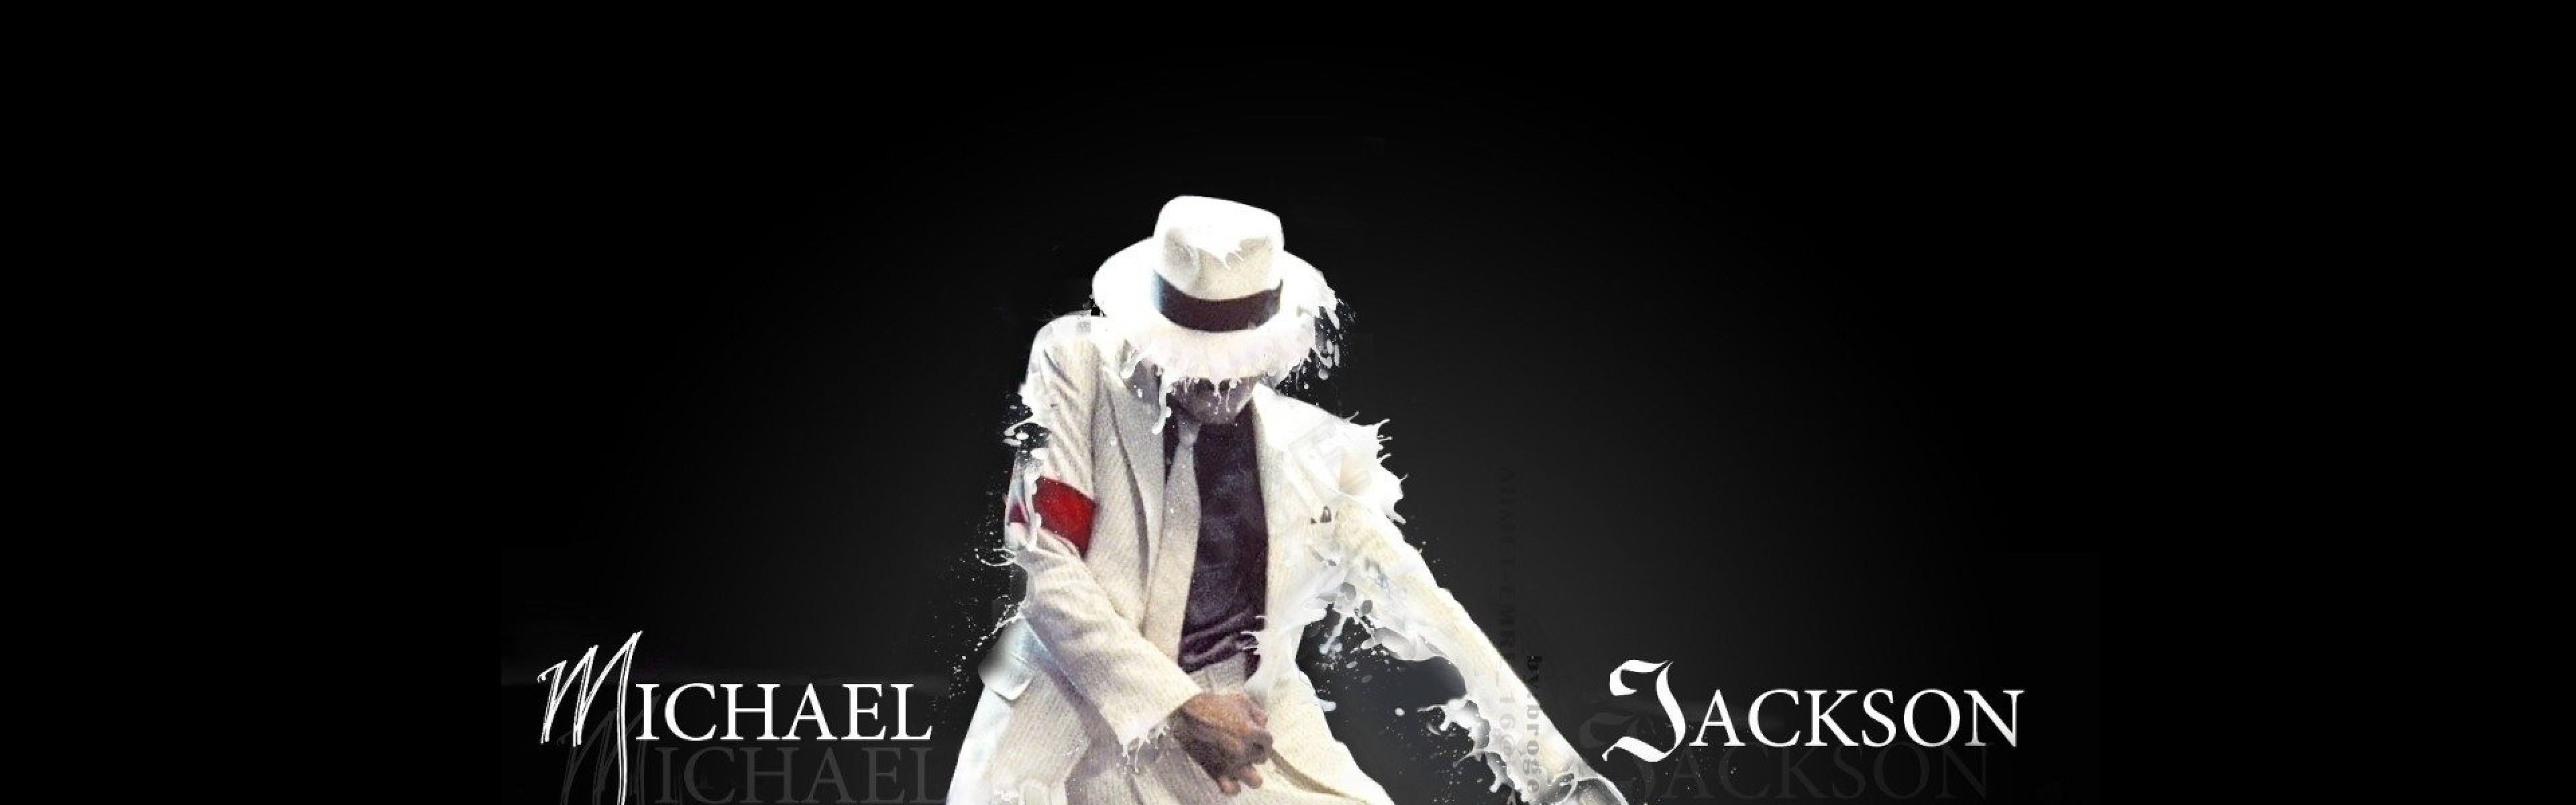 Michael Jackson Images Wallpapers